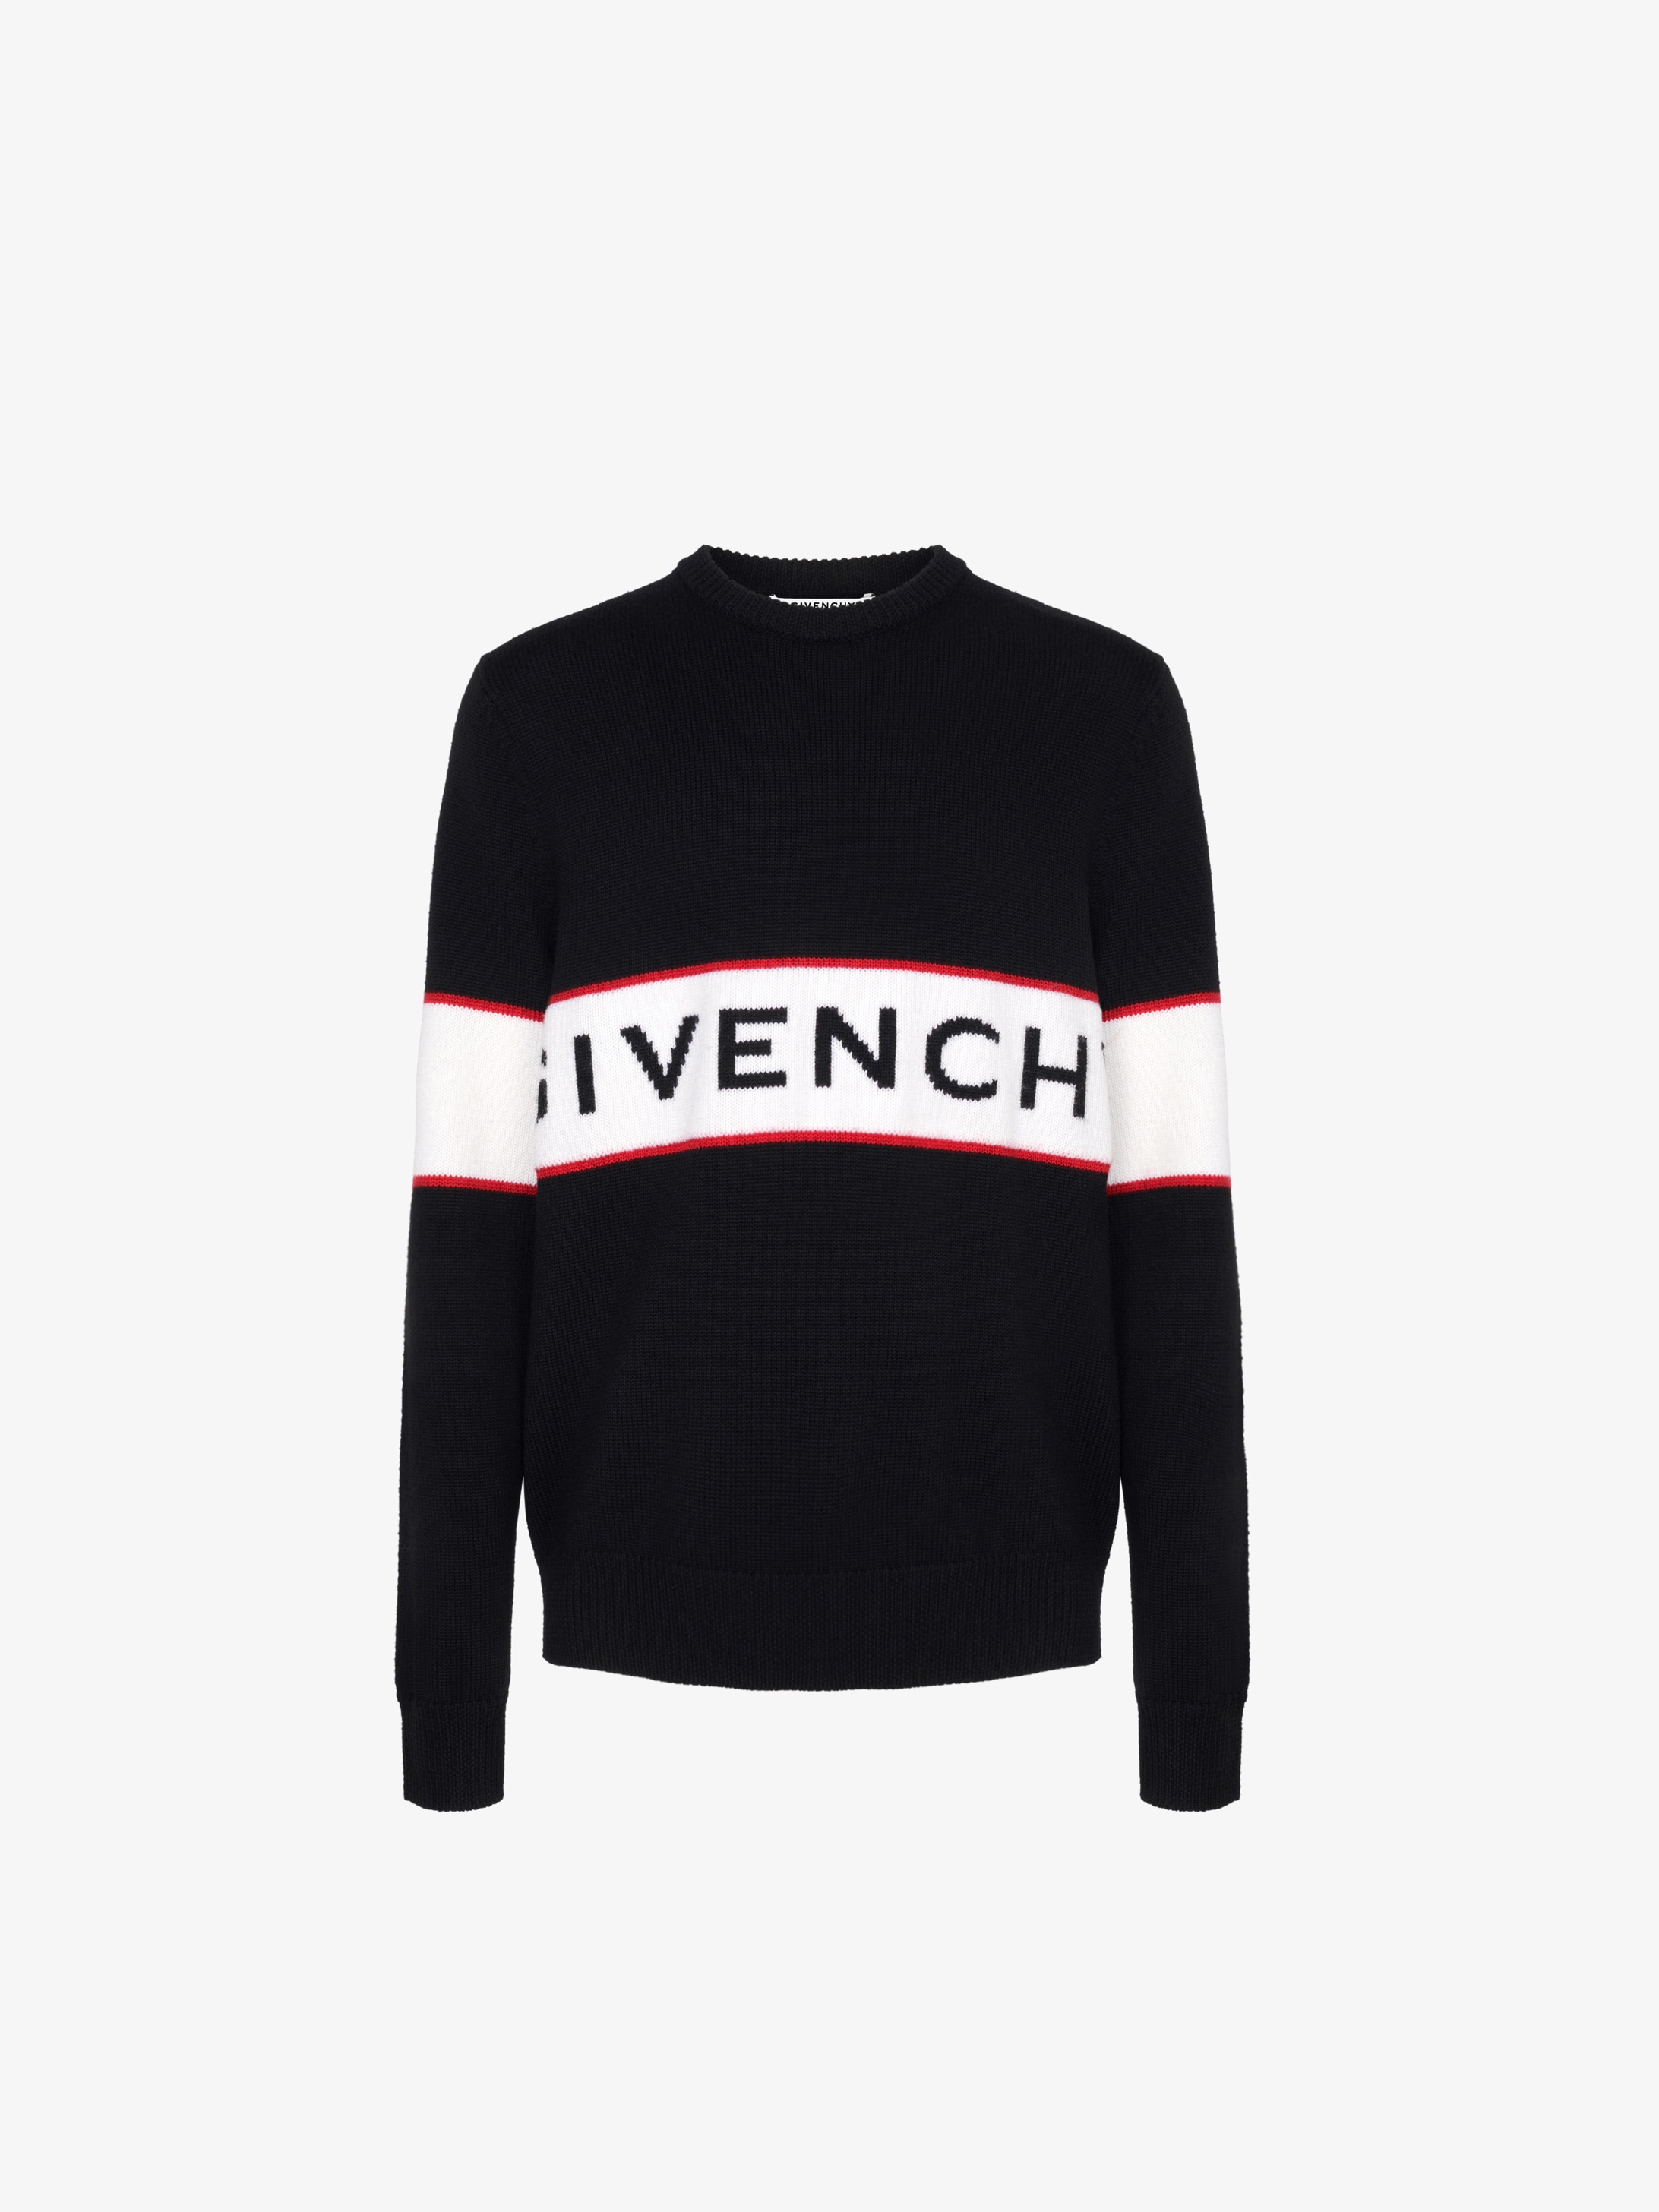 givenchy jumpers womens